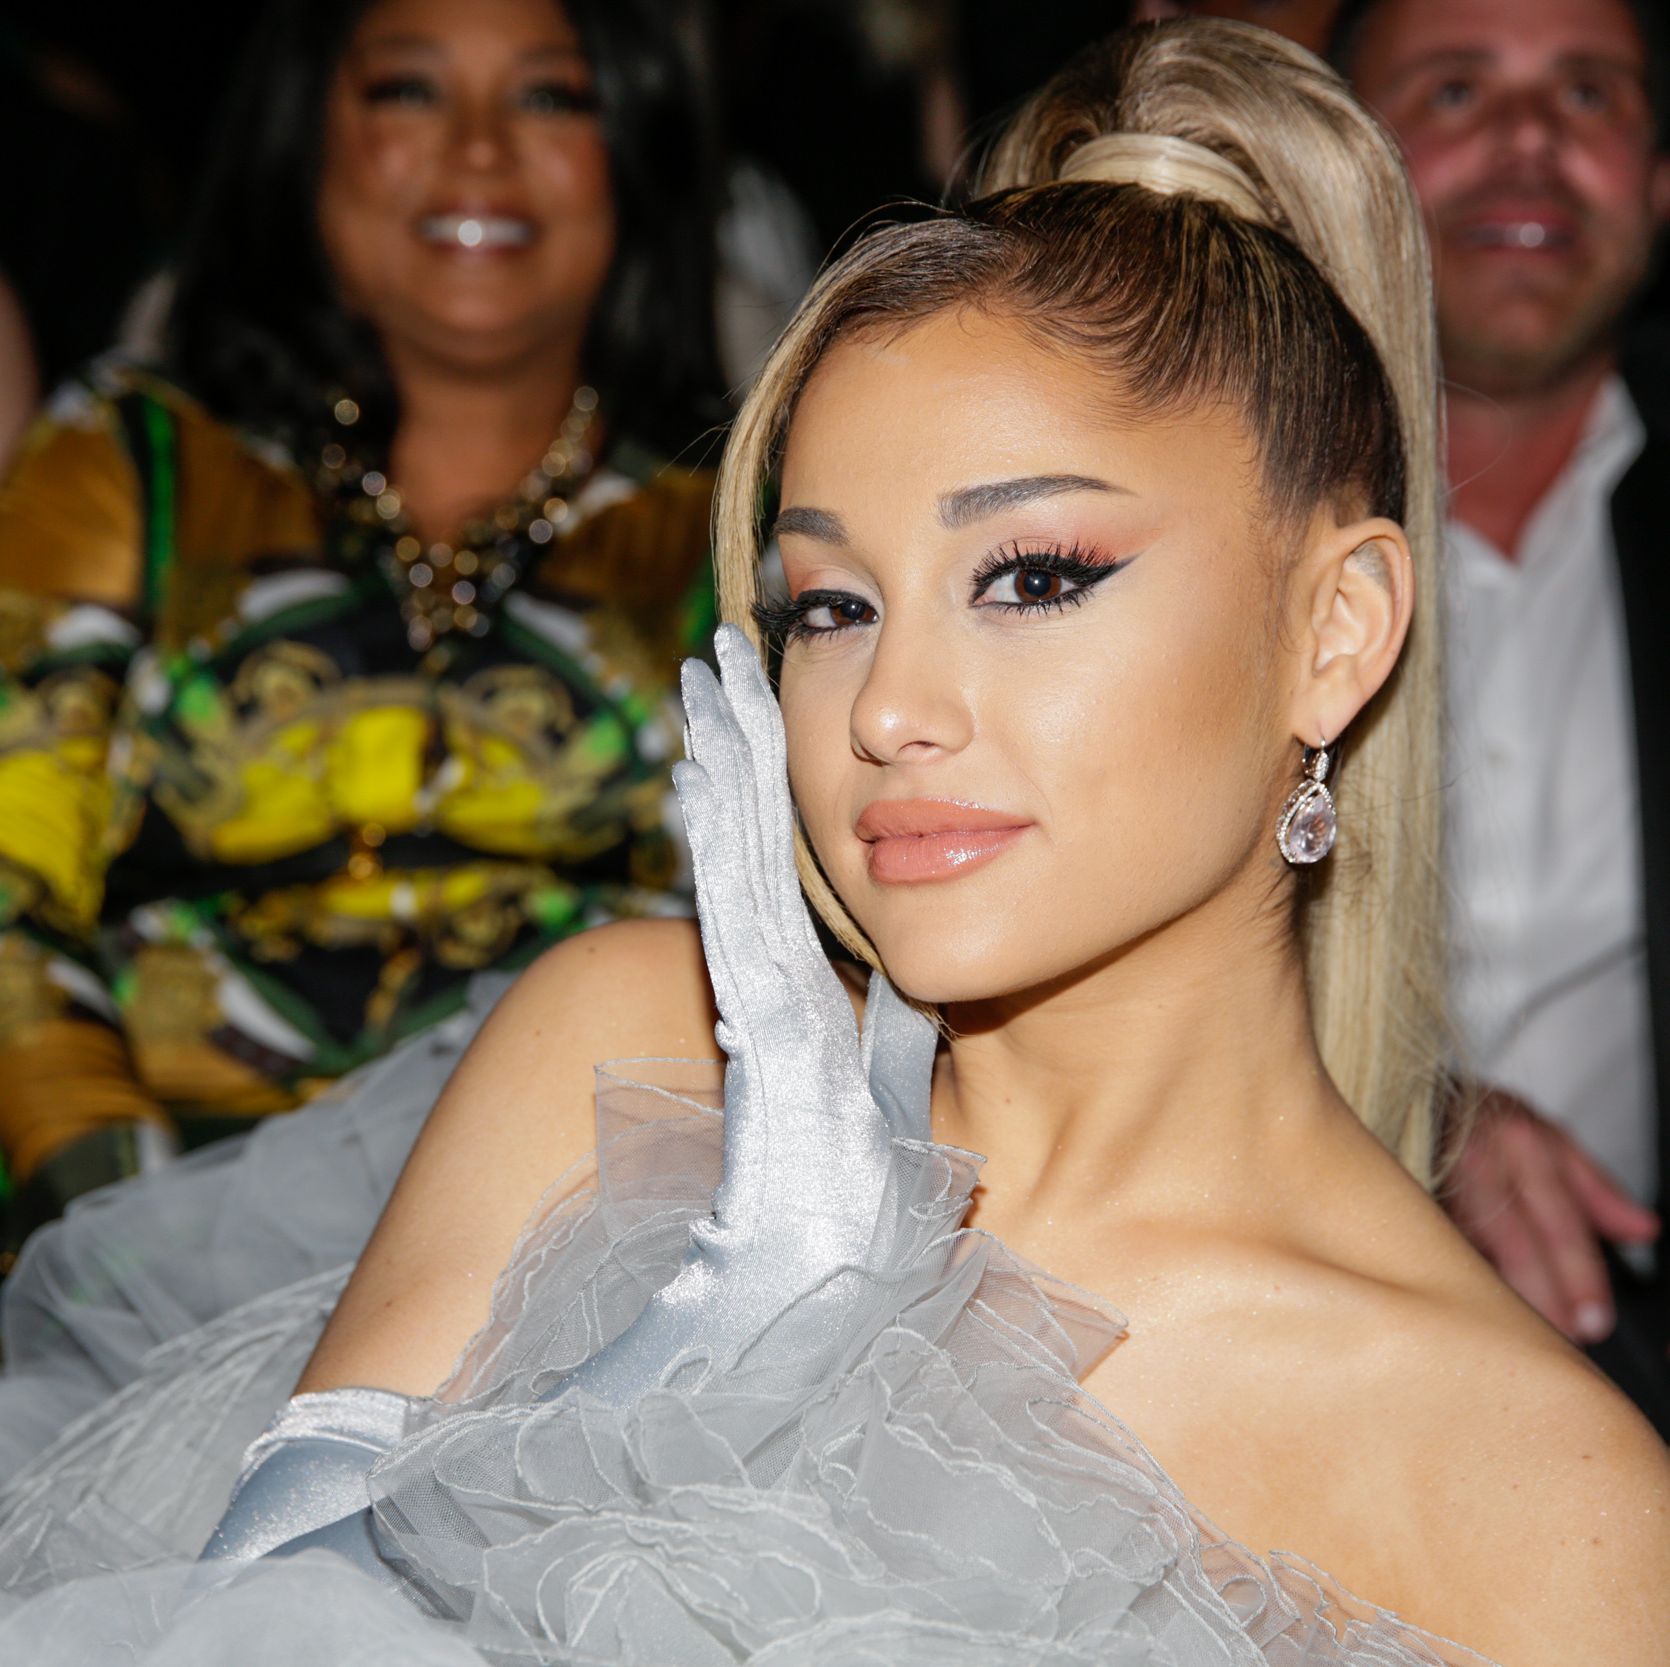 Ariana Grande Started Her Transformation Into Glinda the Good Witch for the New 'Wicked' Movie, and It's Unreal